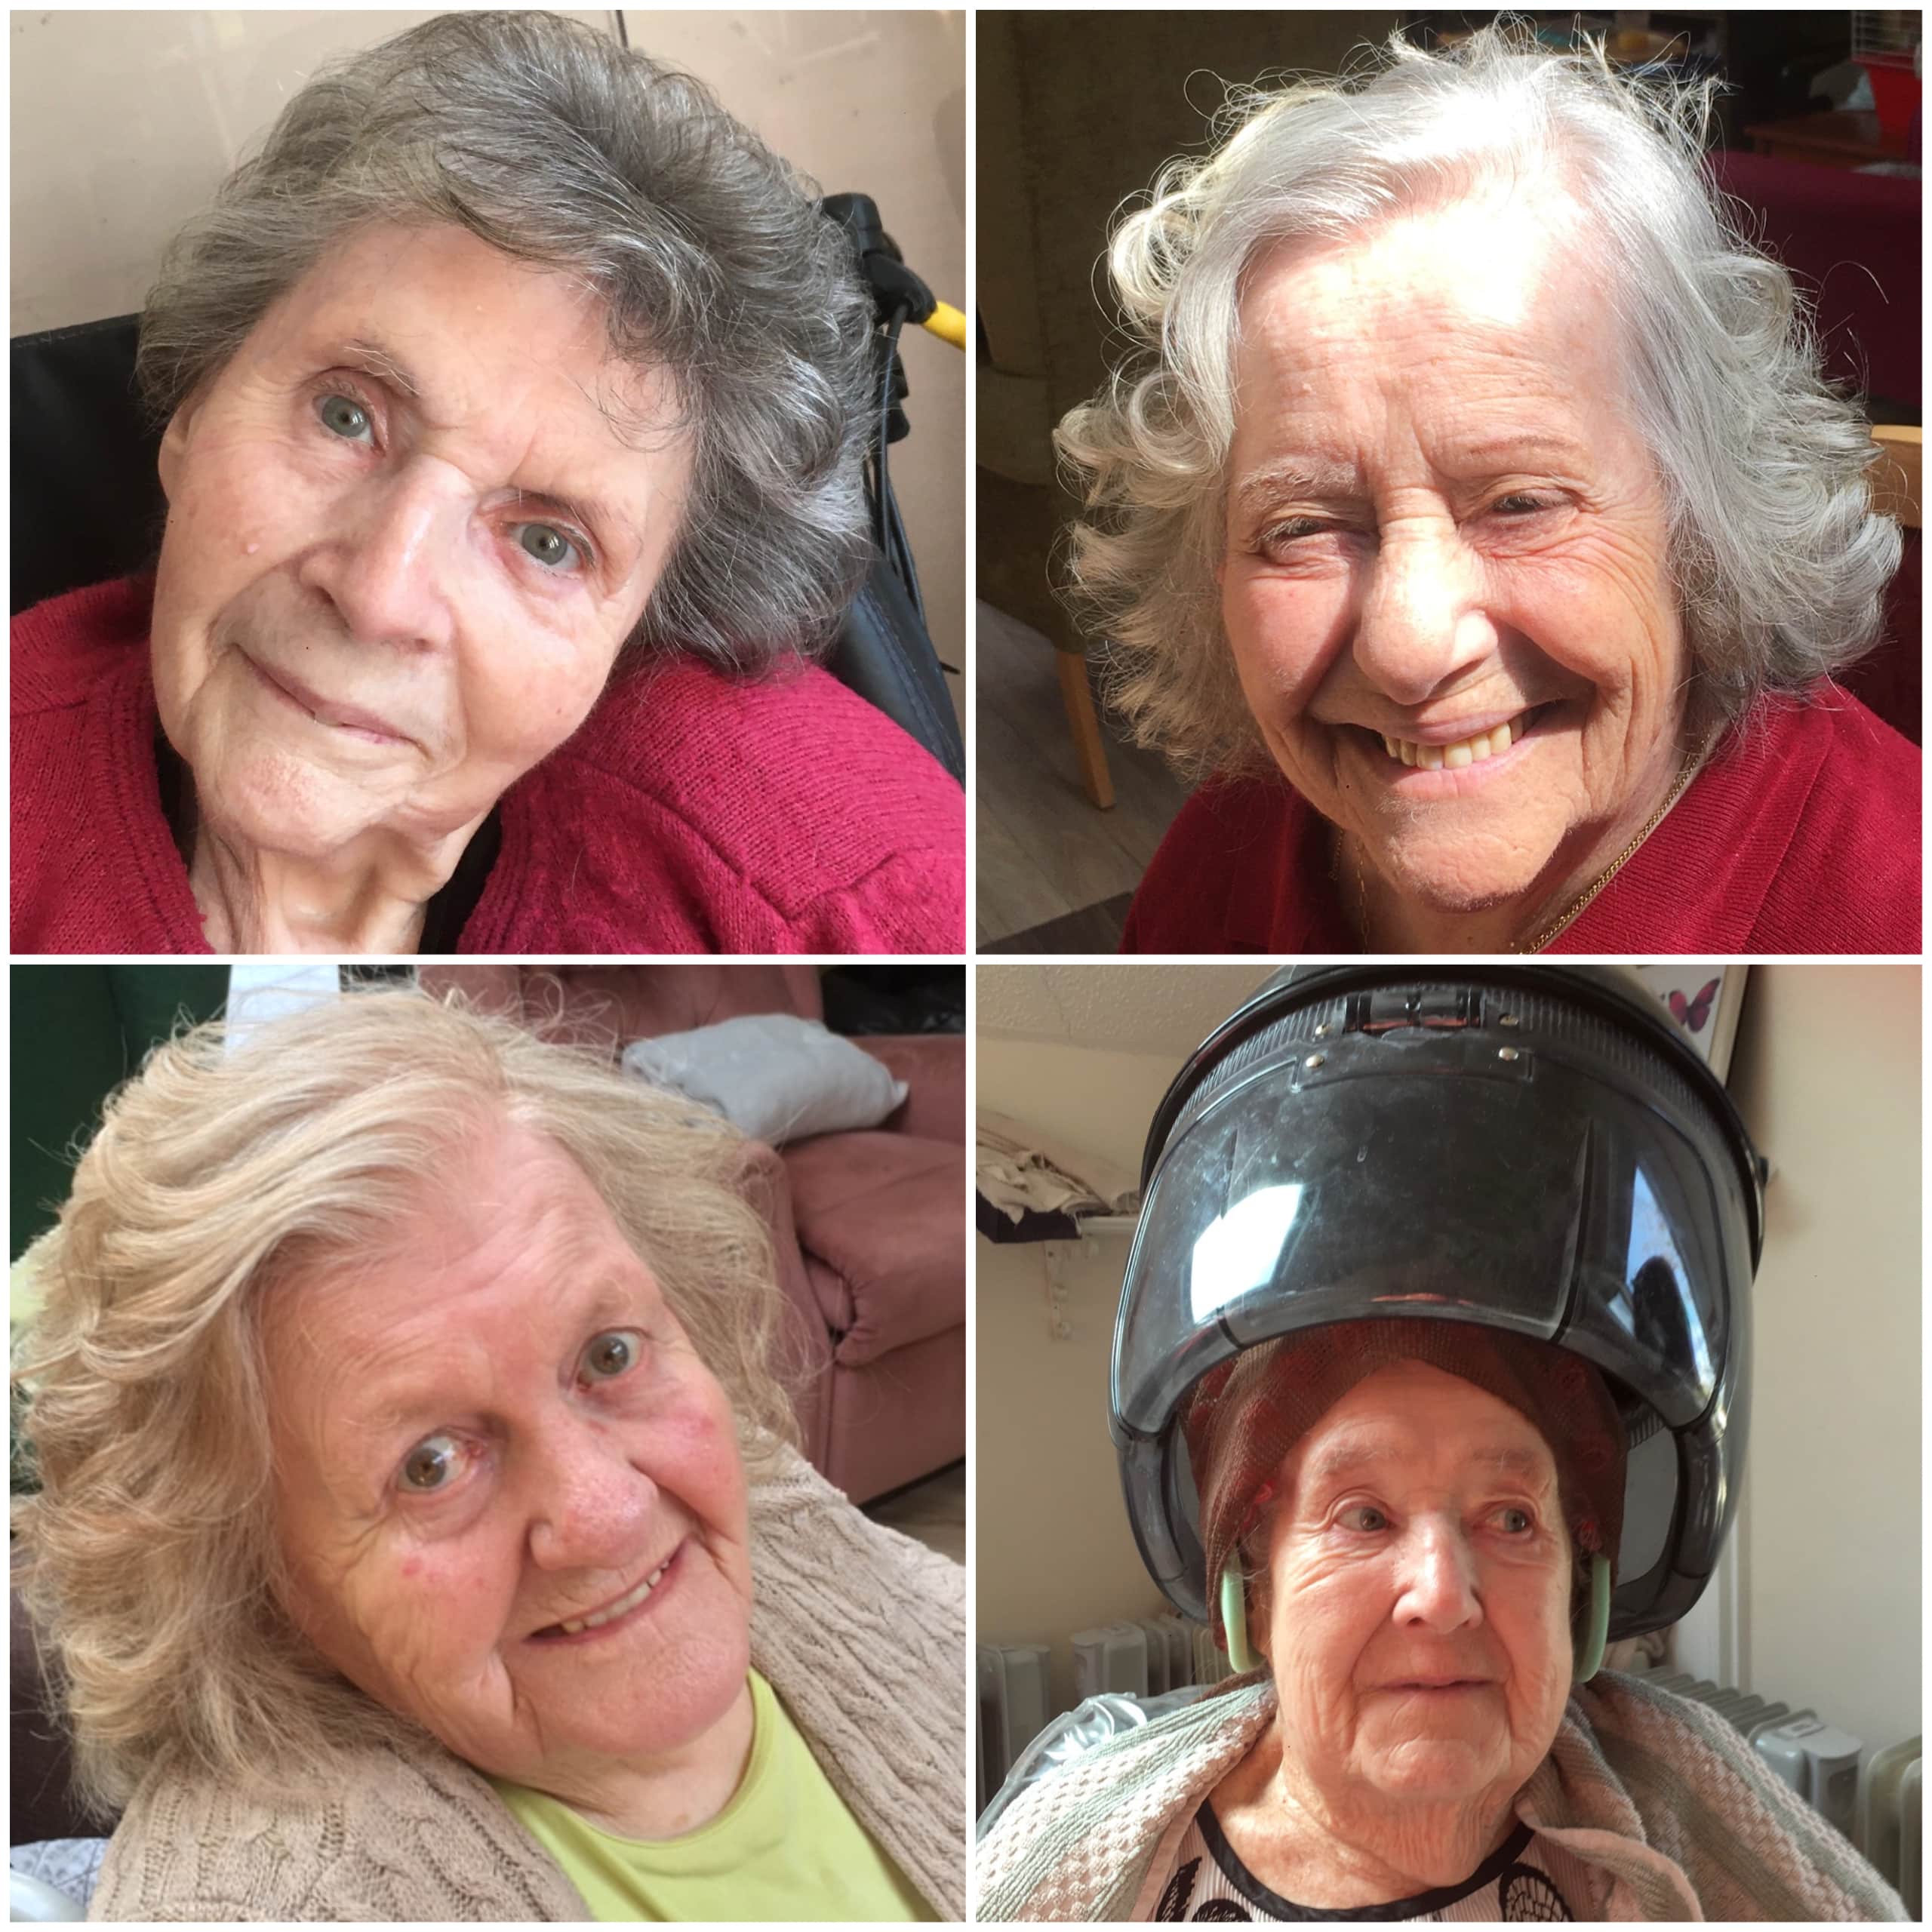 Residents at Epsom-based care home Linden House have their first appointments with the hairdresser for 12 months in the in-house hair salon.